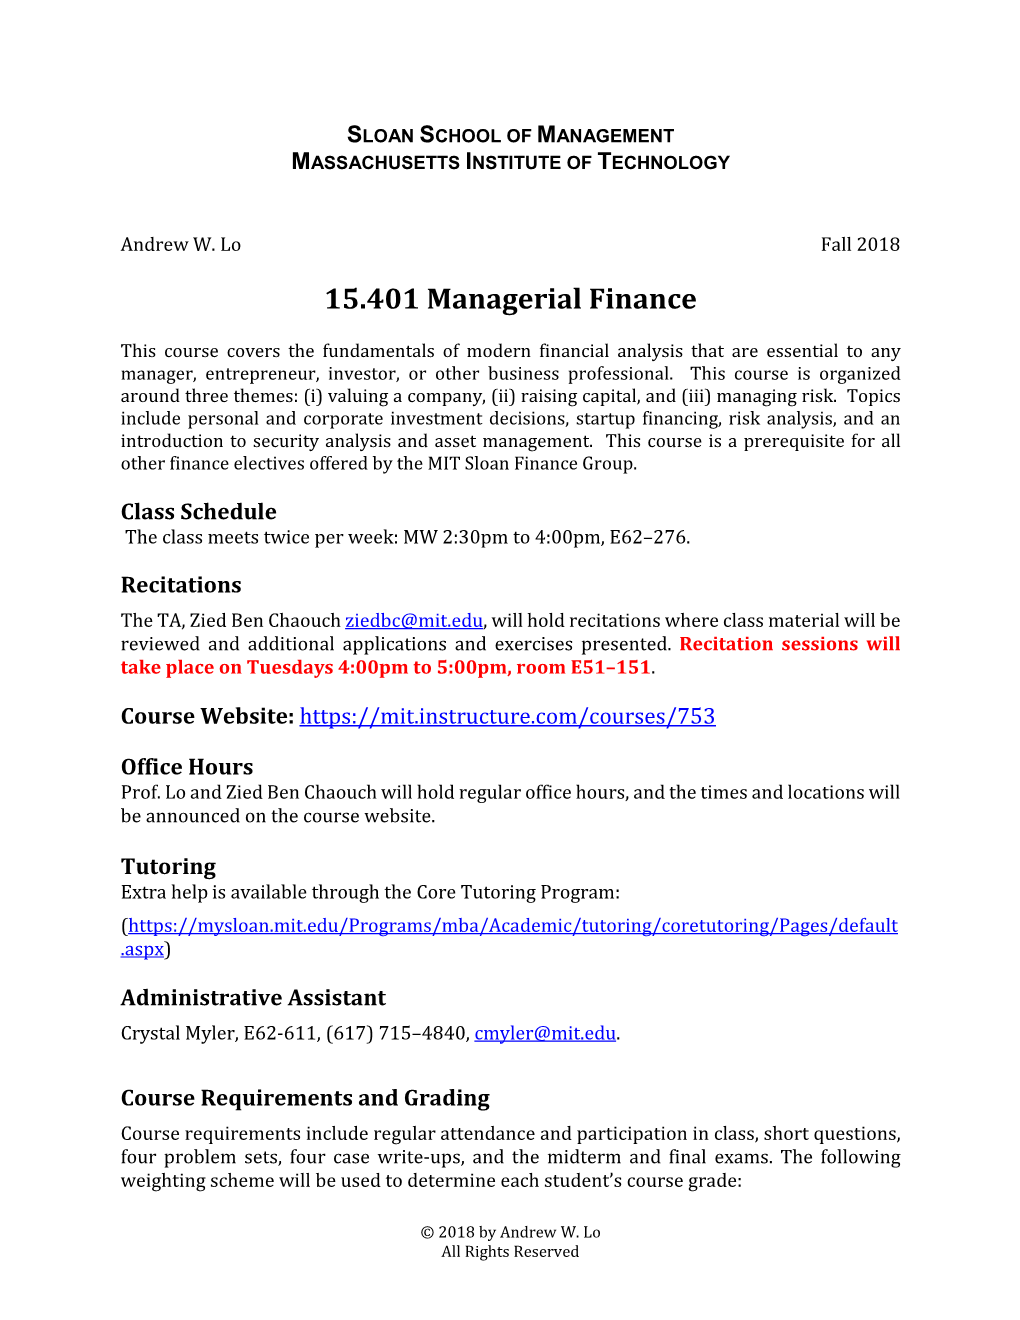 15.401 Managerial Finance